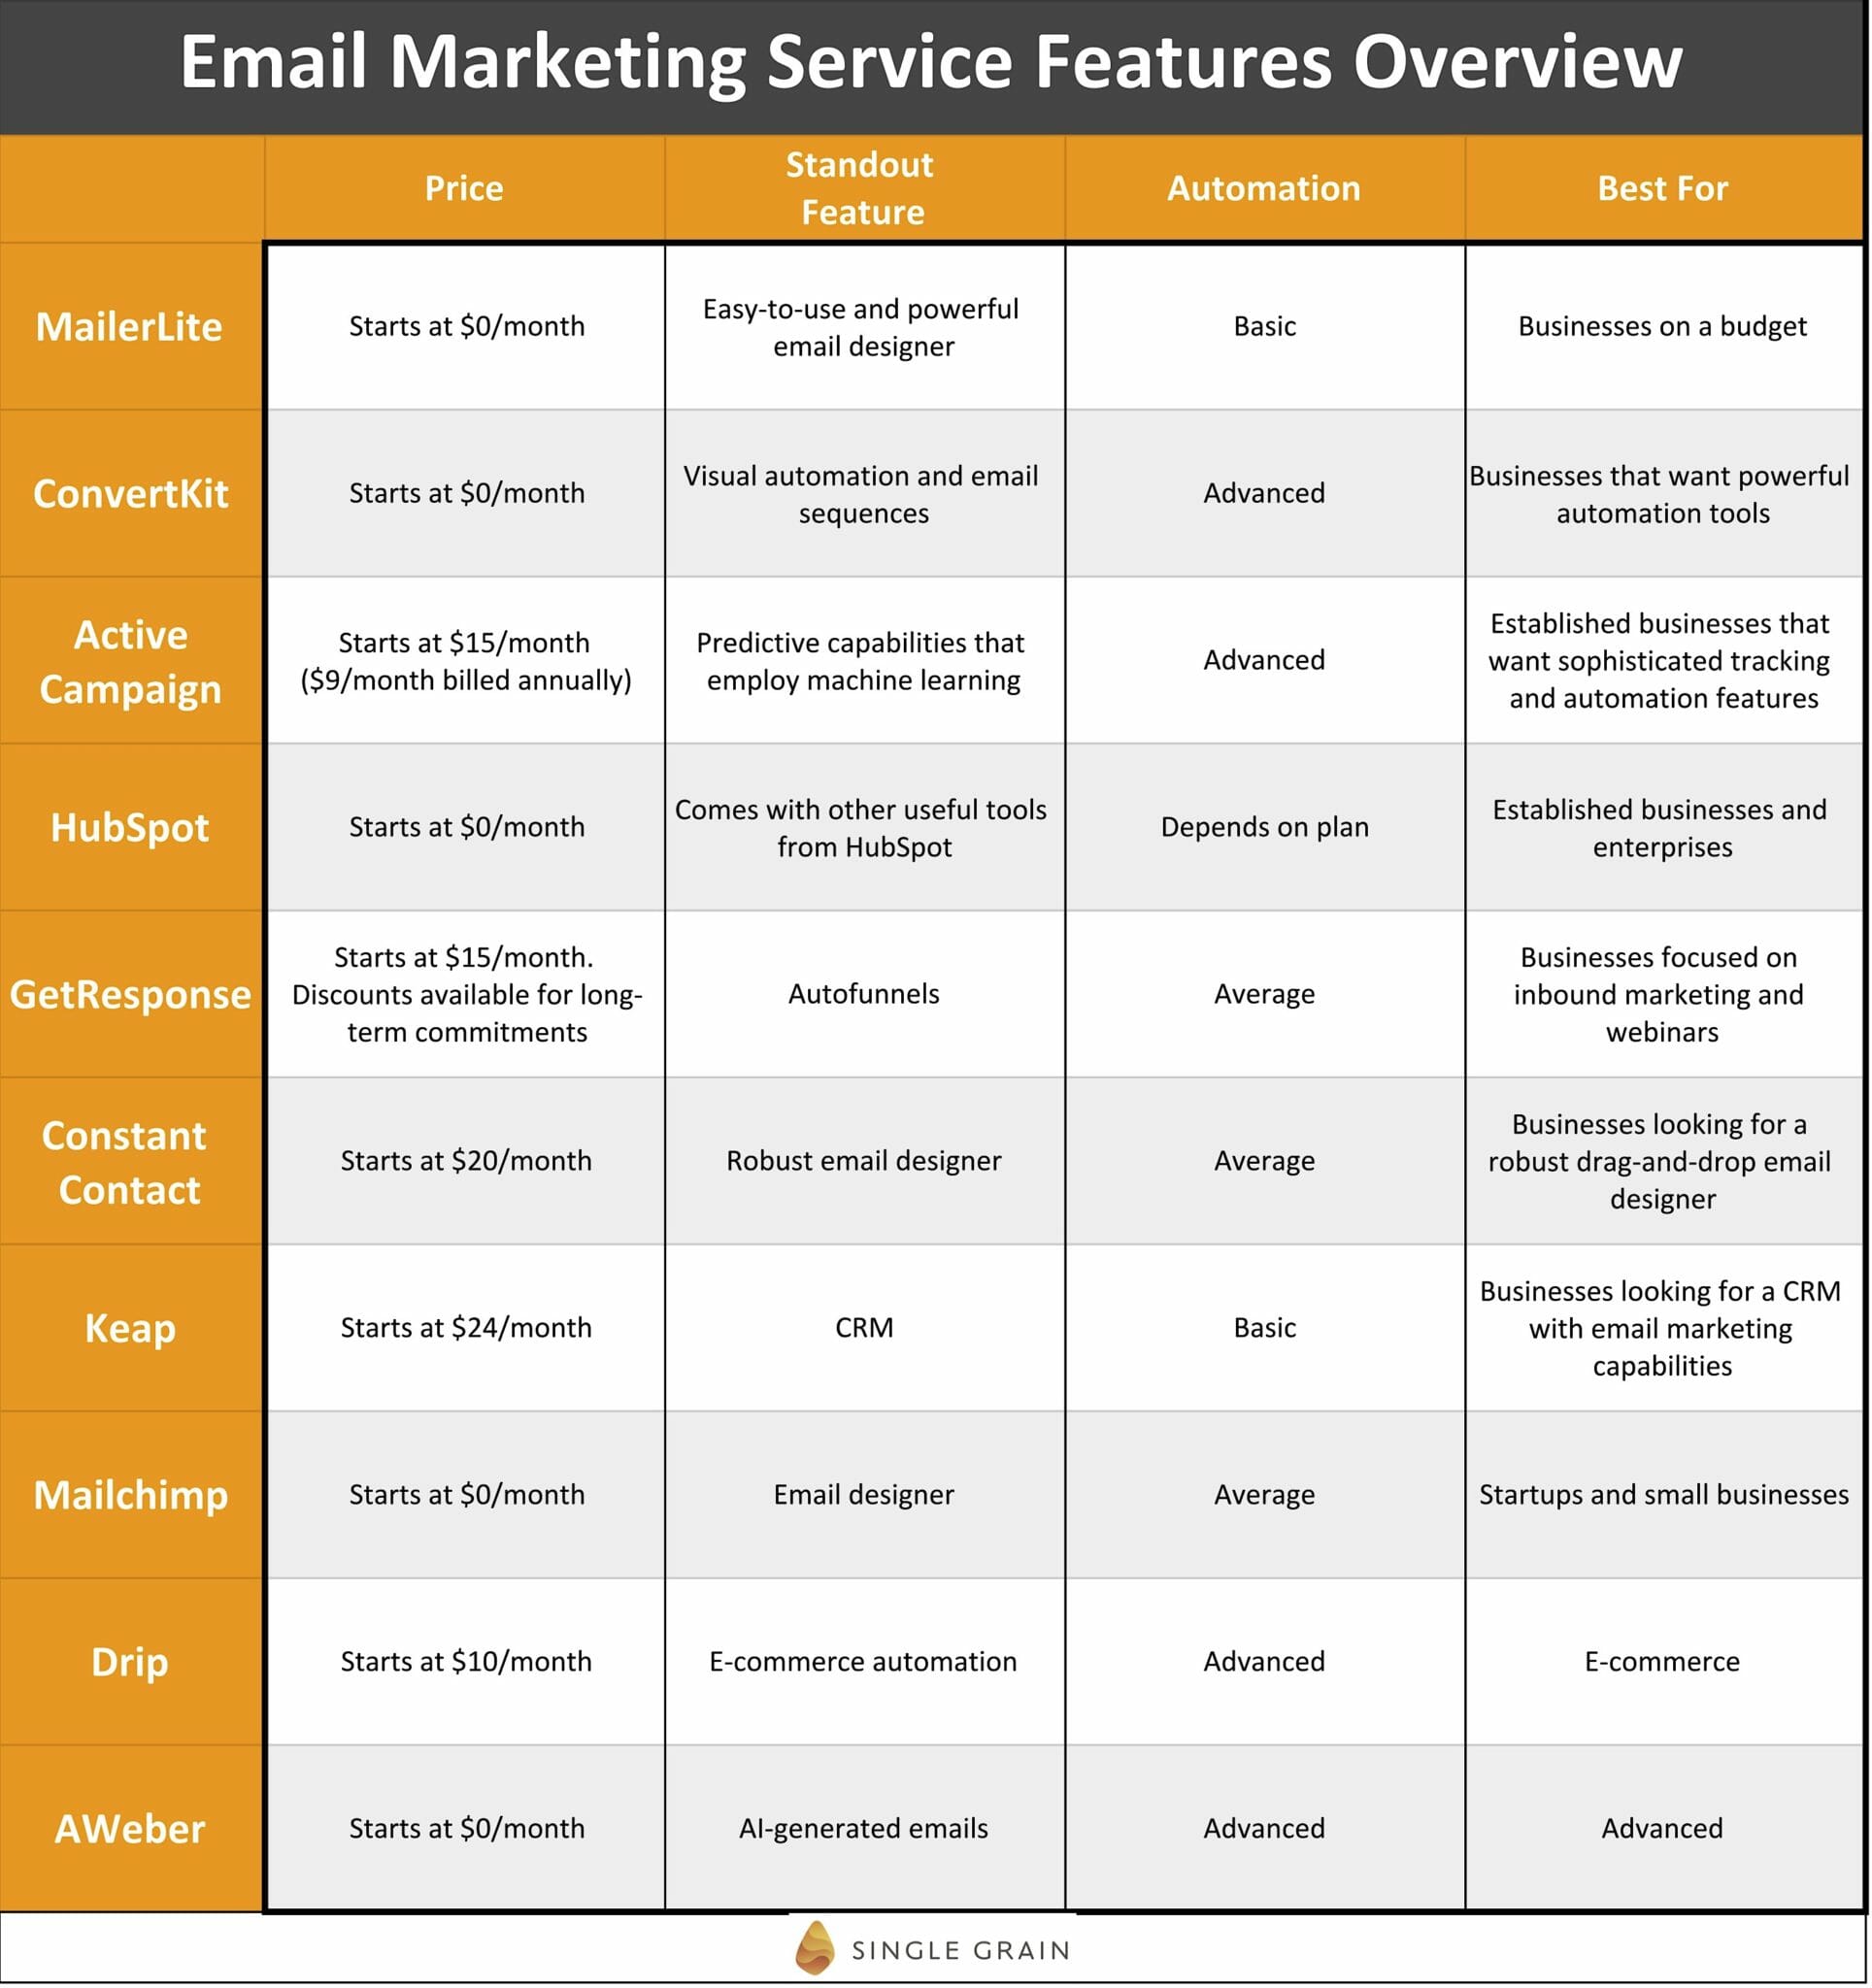 Email Marketing Service Features Overview